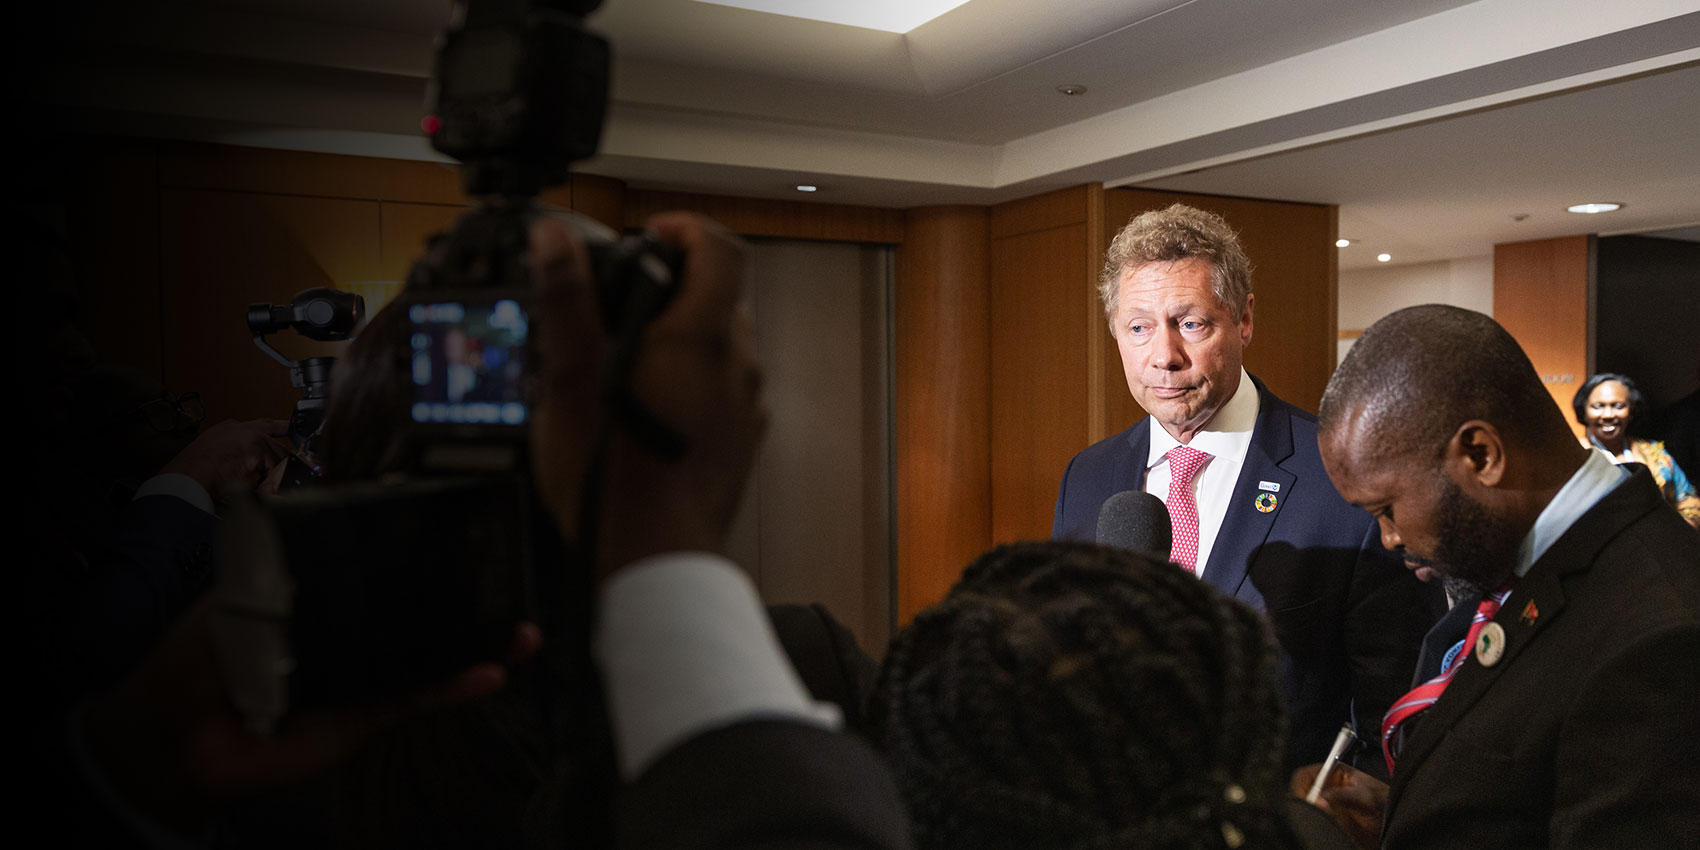 Gavi/2019/Isaac Griberg- Gavi CEO, Dr Seth Berkley, interviewed by media following a meeting with H.E. President Joao Lourenco, President of Angola, on the occasion of the 7th Tokyo International Conference on African Development (TICAD) in Yokohama